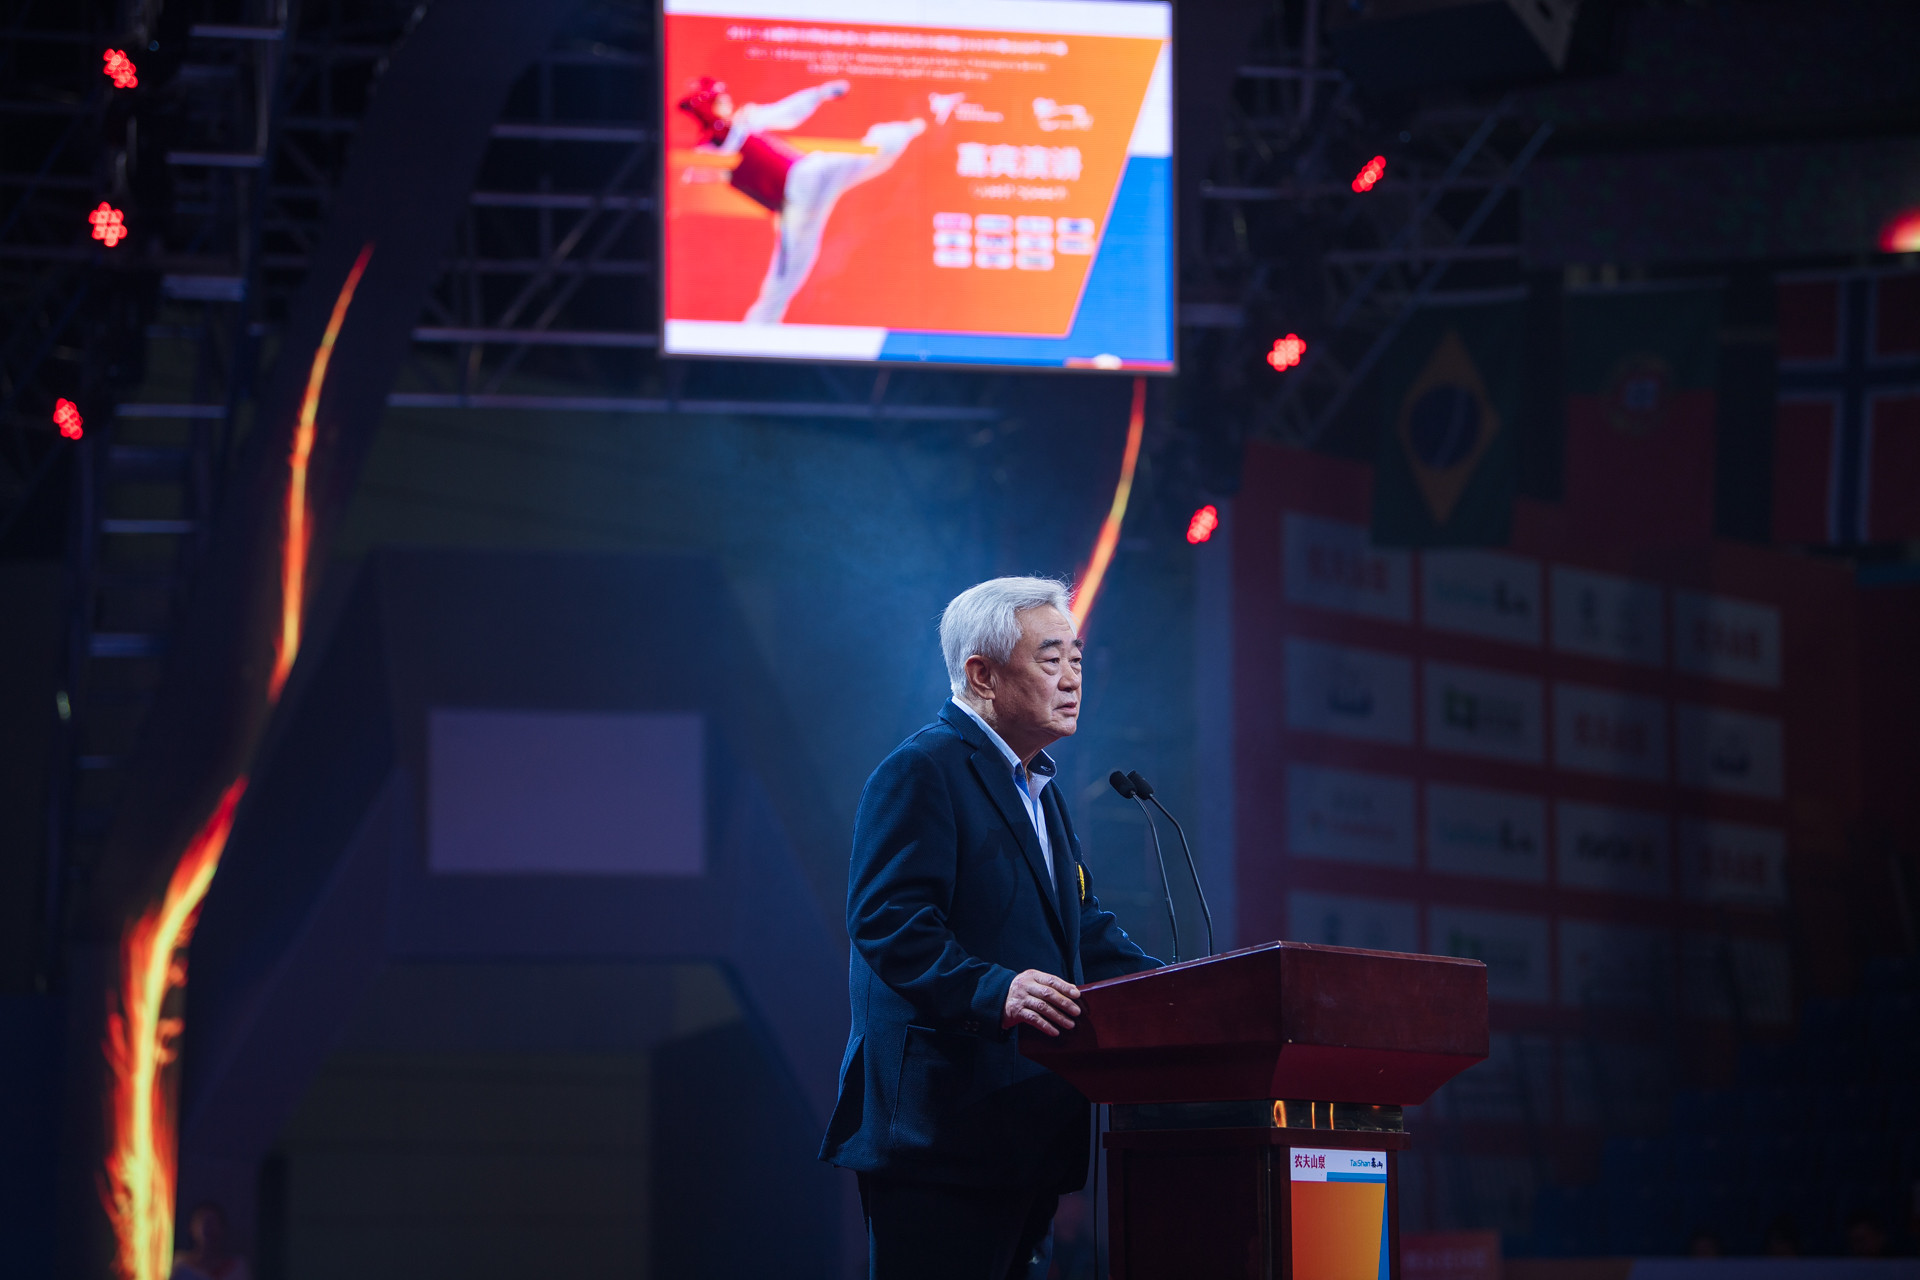 World Taekwondo President Chungwon Choue has hailed the upcoming Grand Slam Champions Series as the beginning of a new chapter in the sport’s history ©World Taekwondo